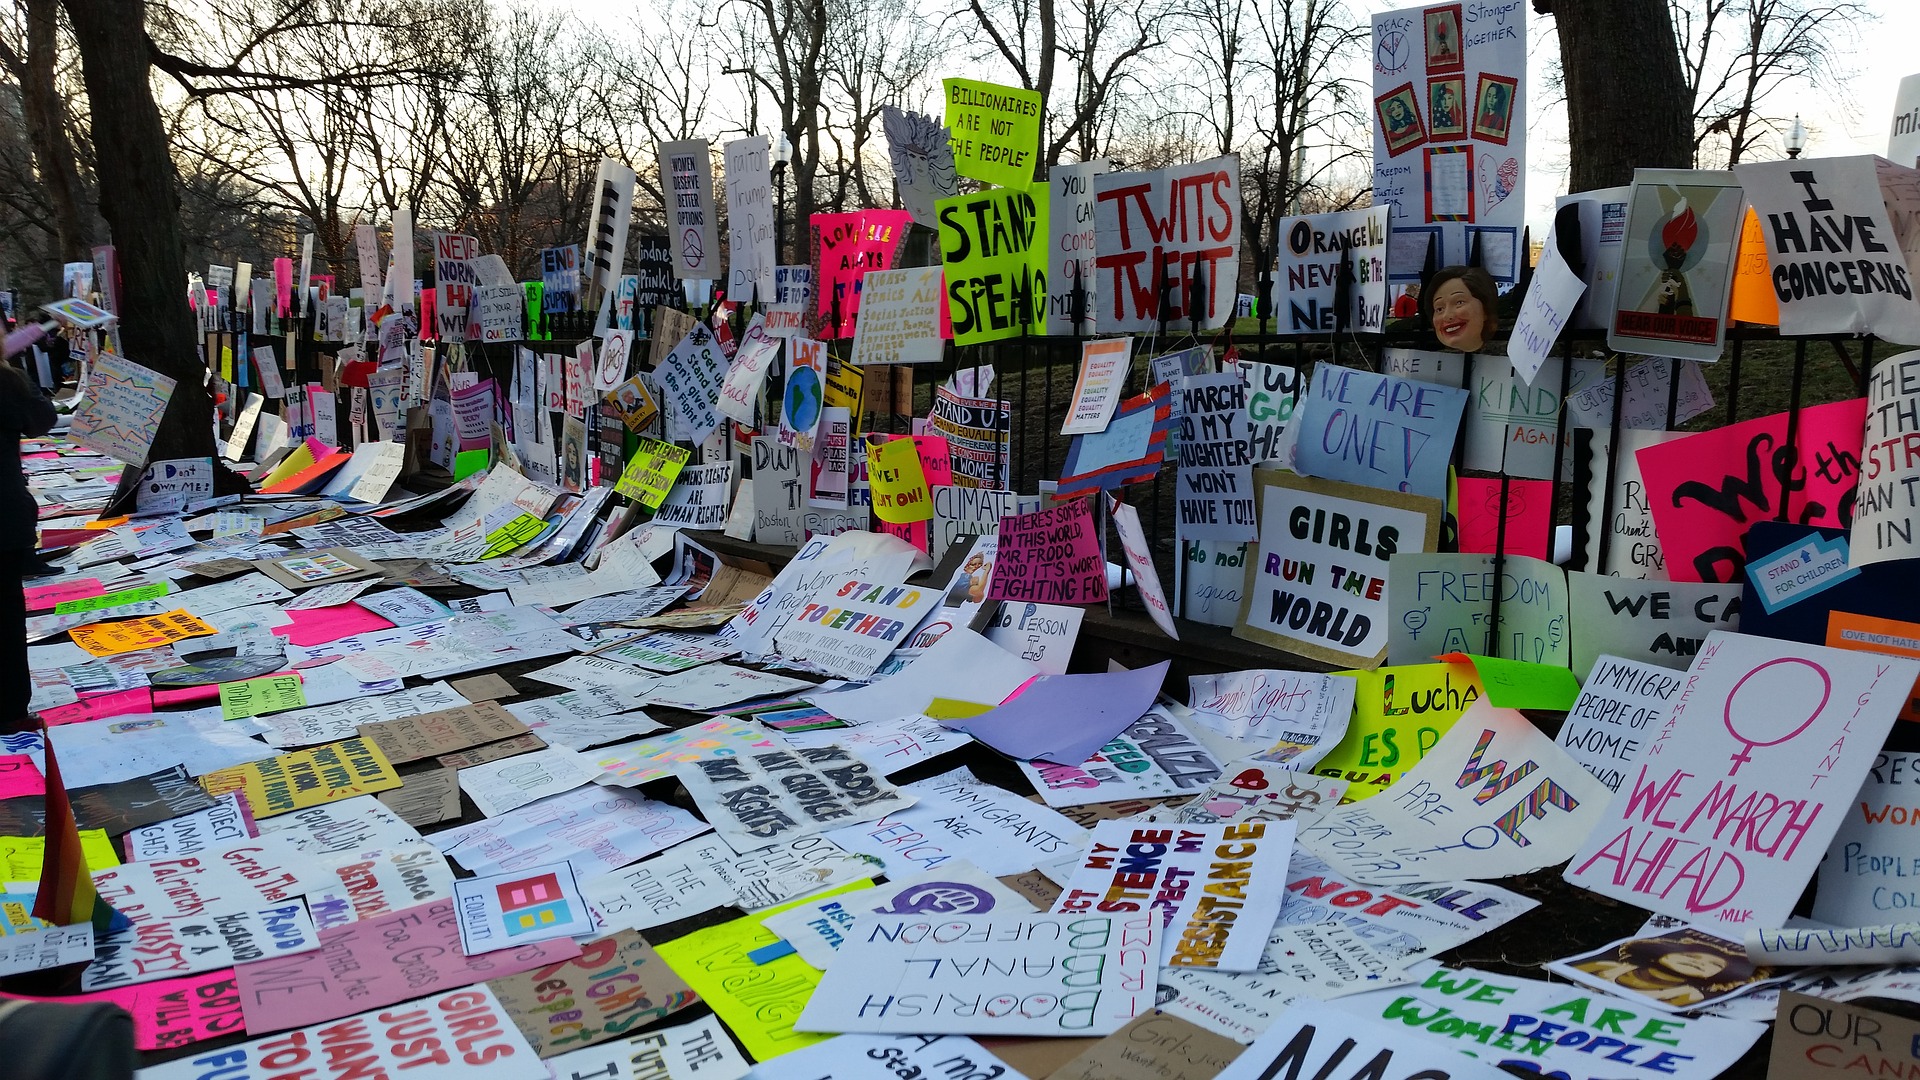 an image of a large number of protest signs from the Women's March collected on the sidewalk